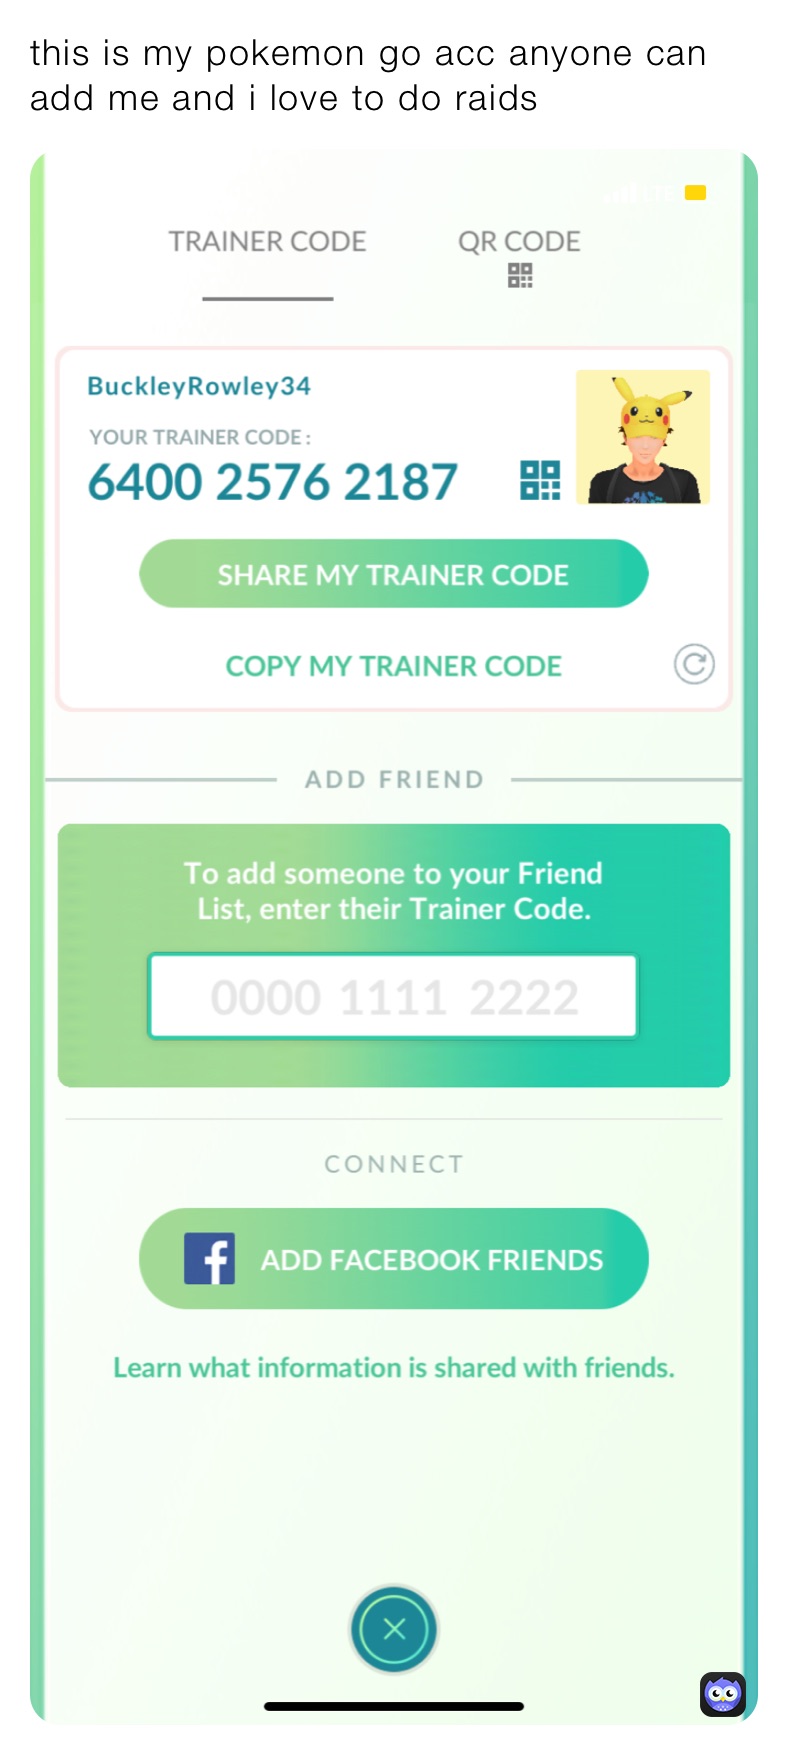 this is my pokemon go acc anyone can add me and i love to do raids